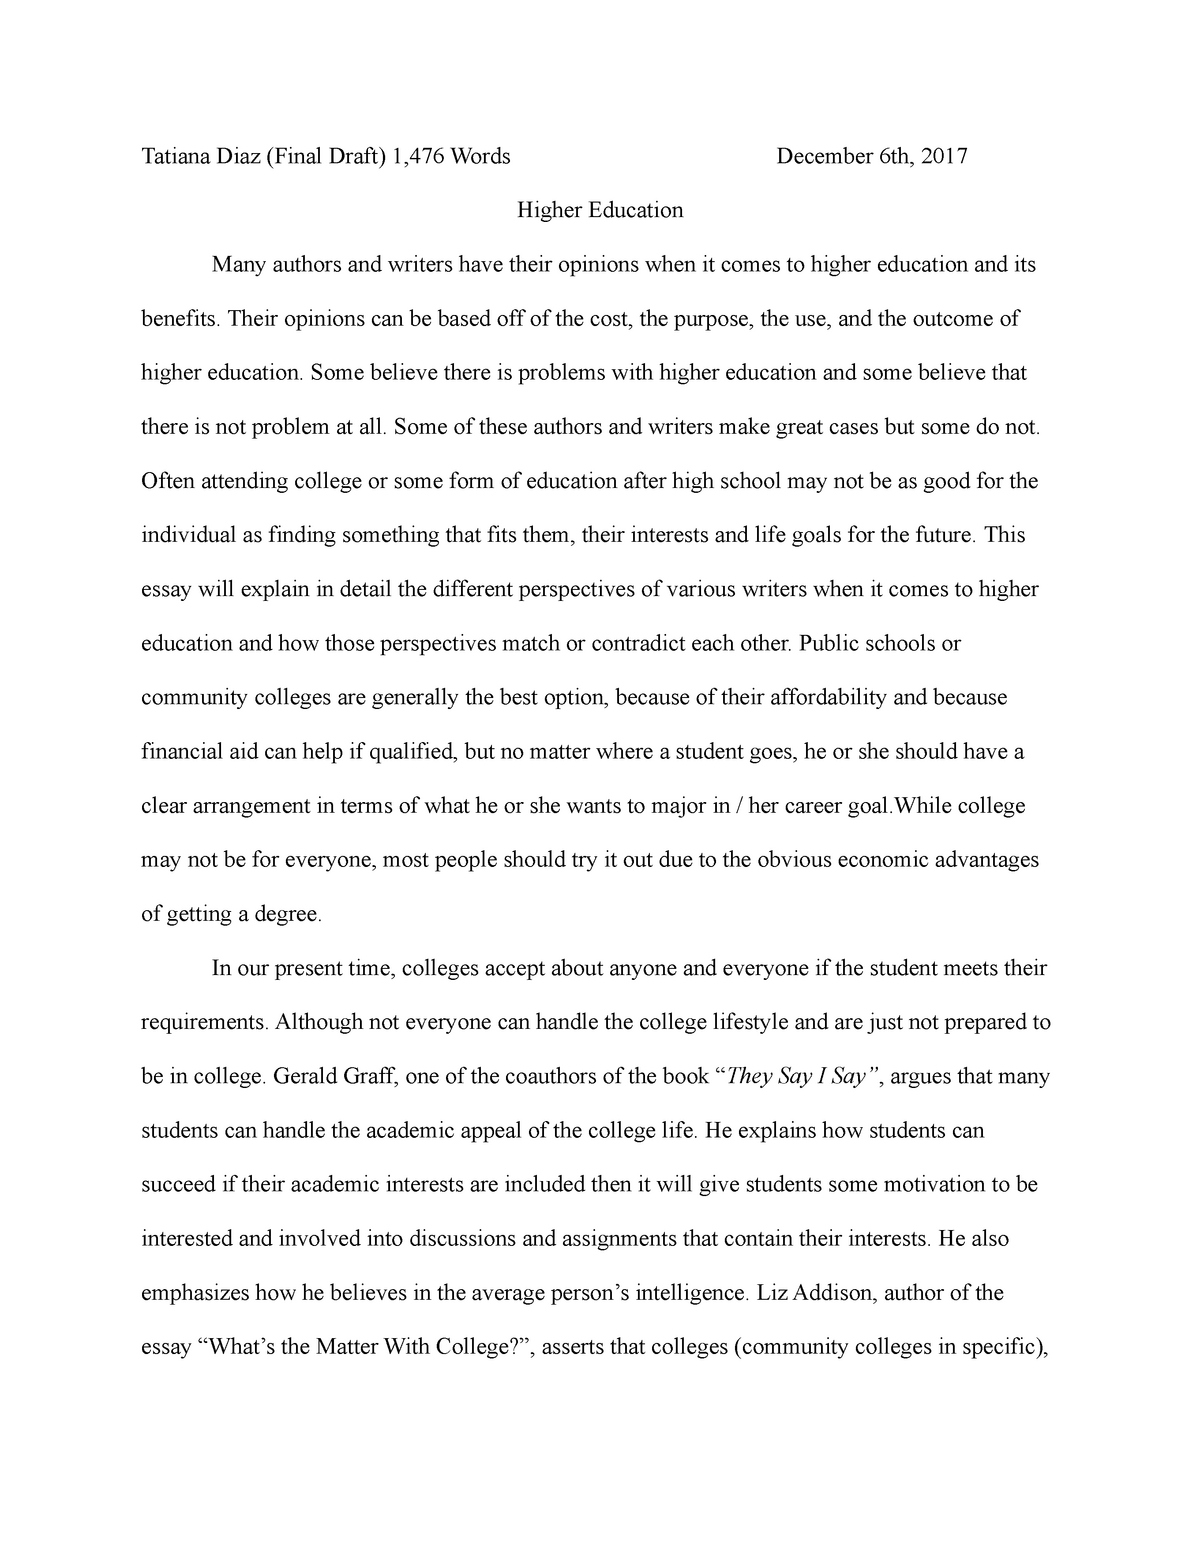 Essay on college education benefits